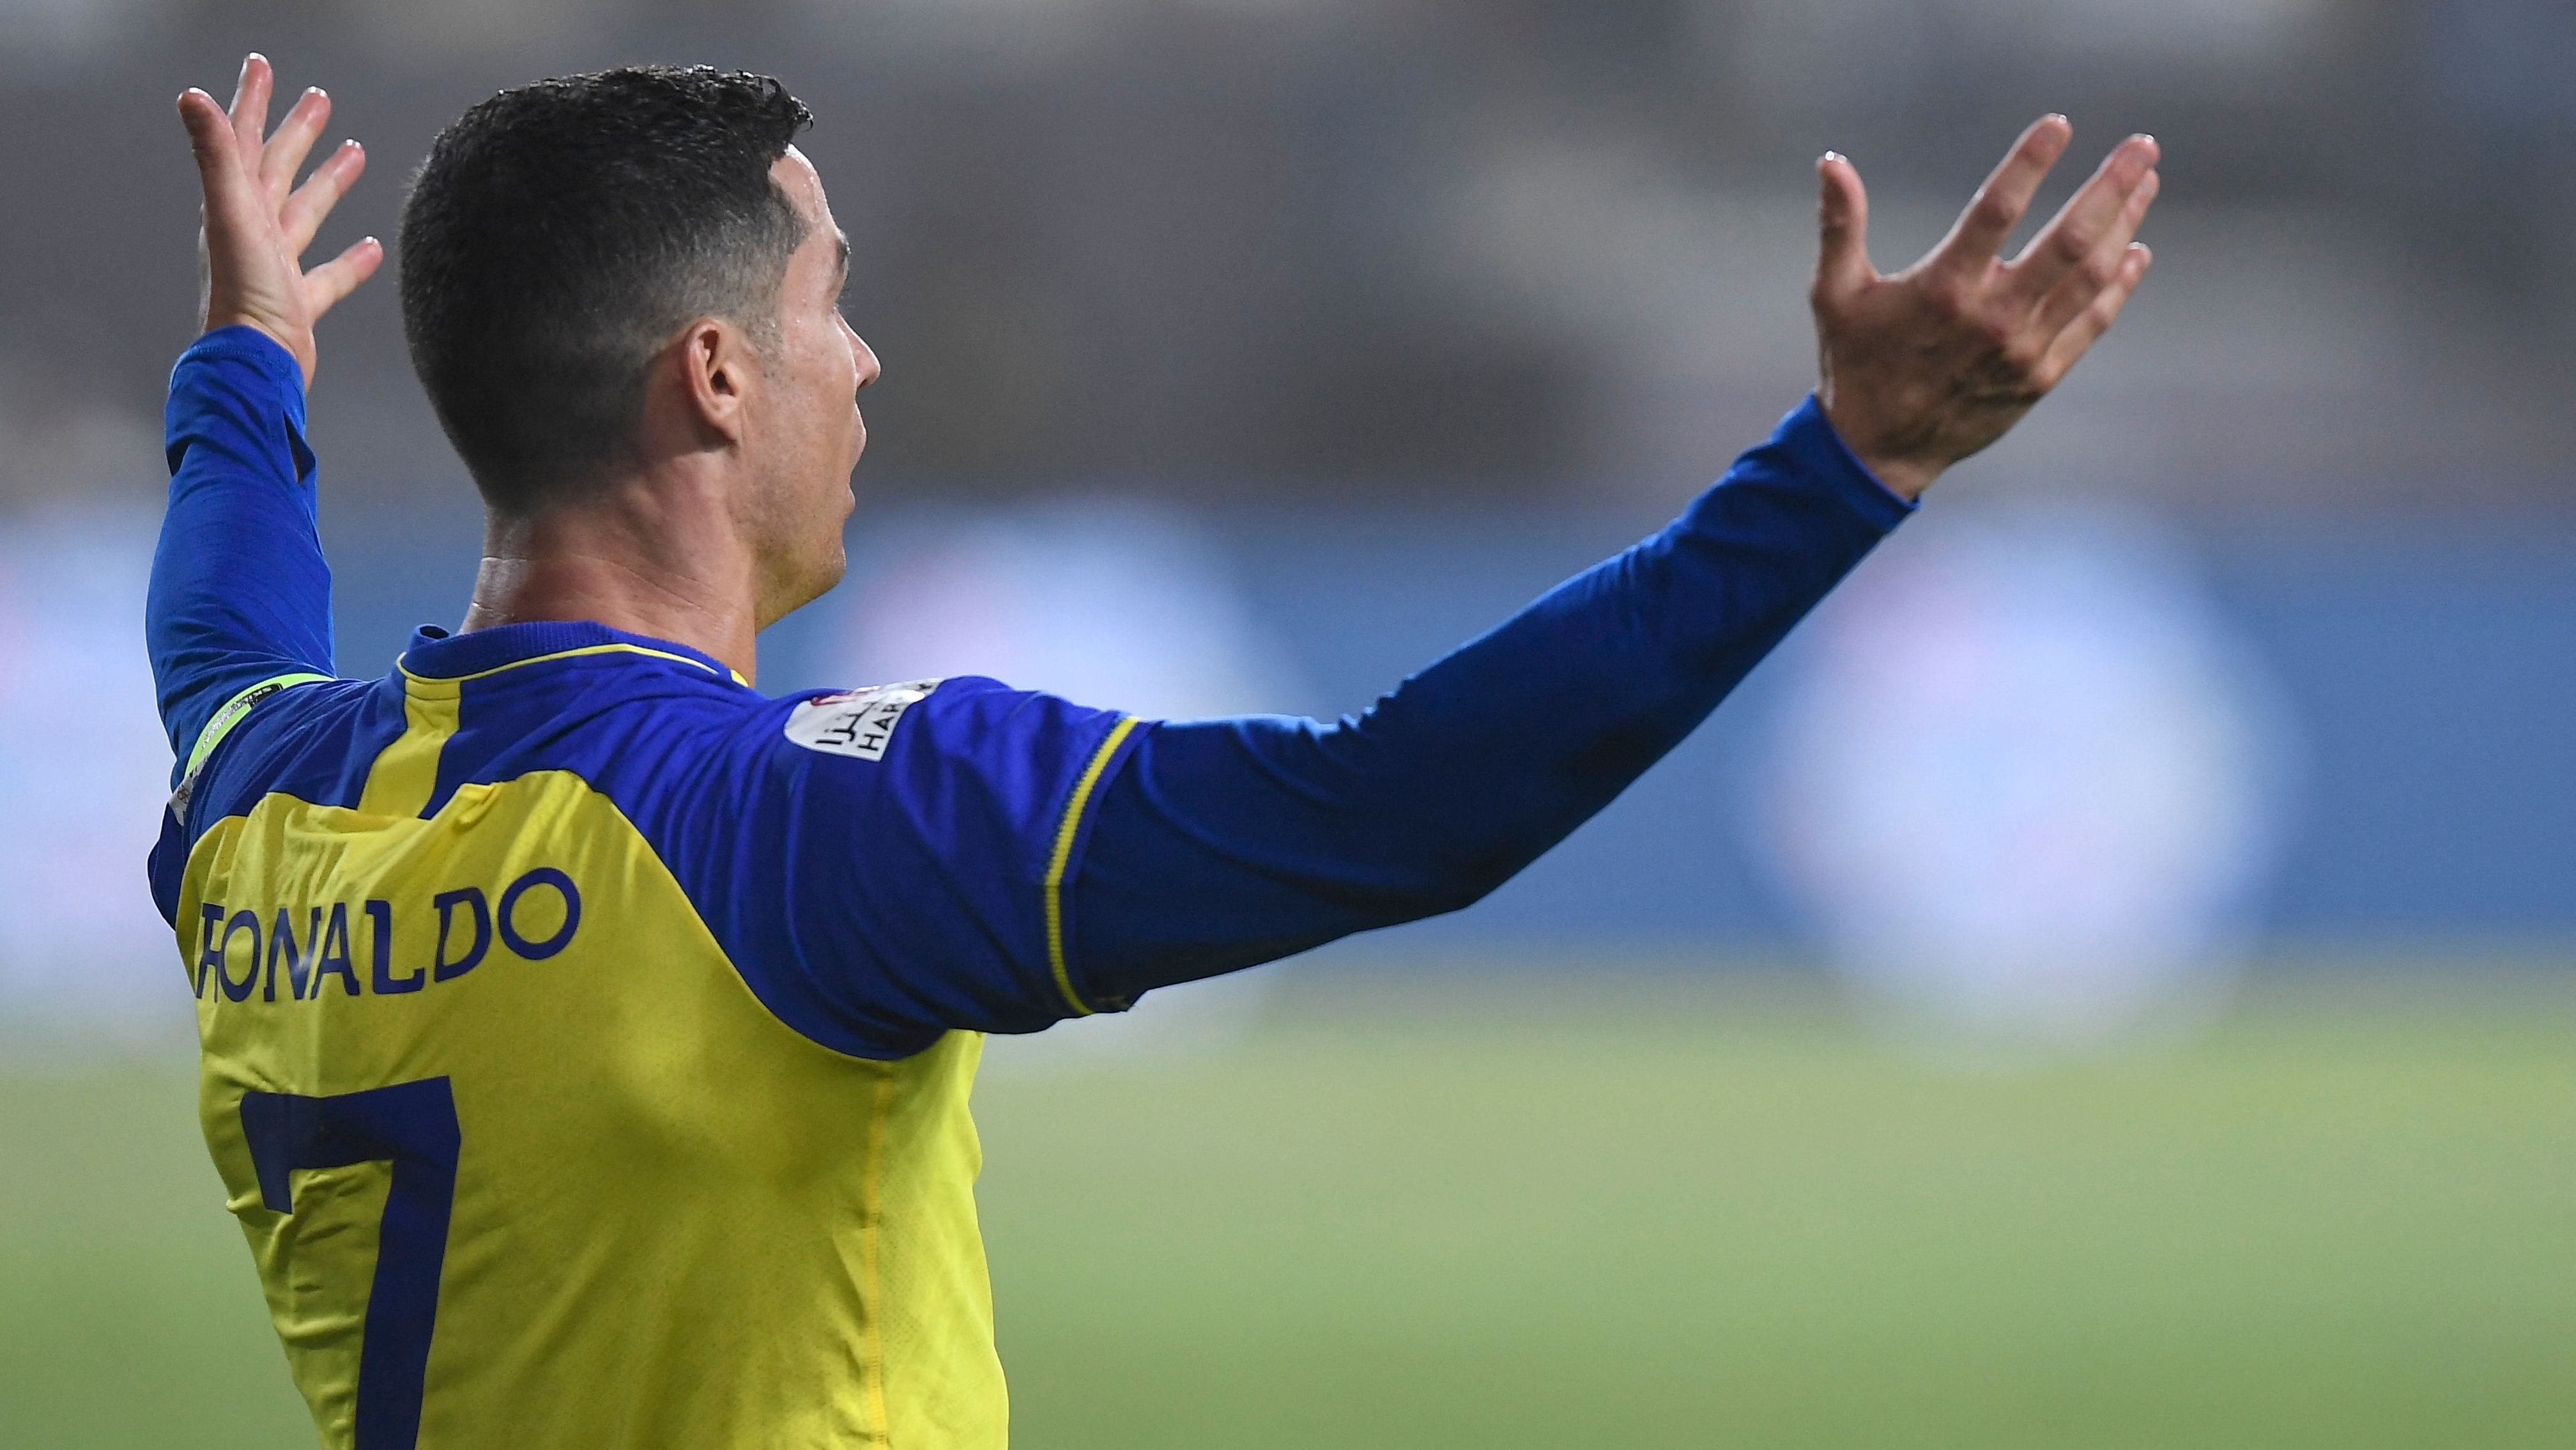 WATCH: Cristiano Ronaldo goes BESERK and berates referee after being denied penalty for Al-Nassr against Al-Raed | Goal.com UK